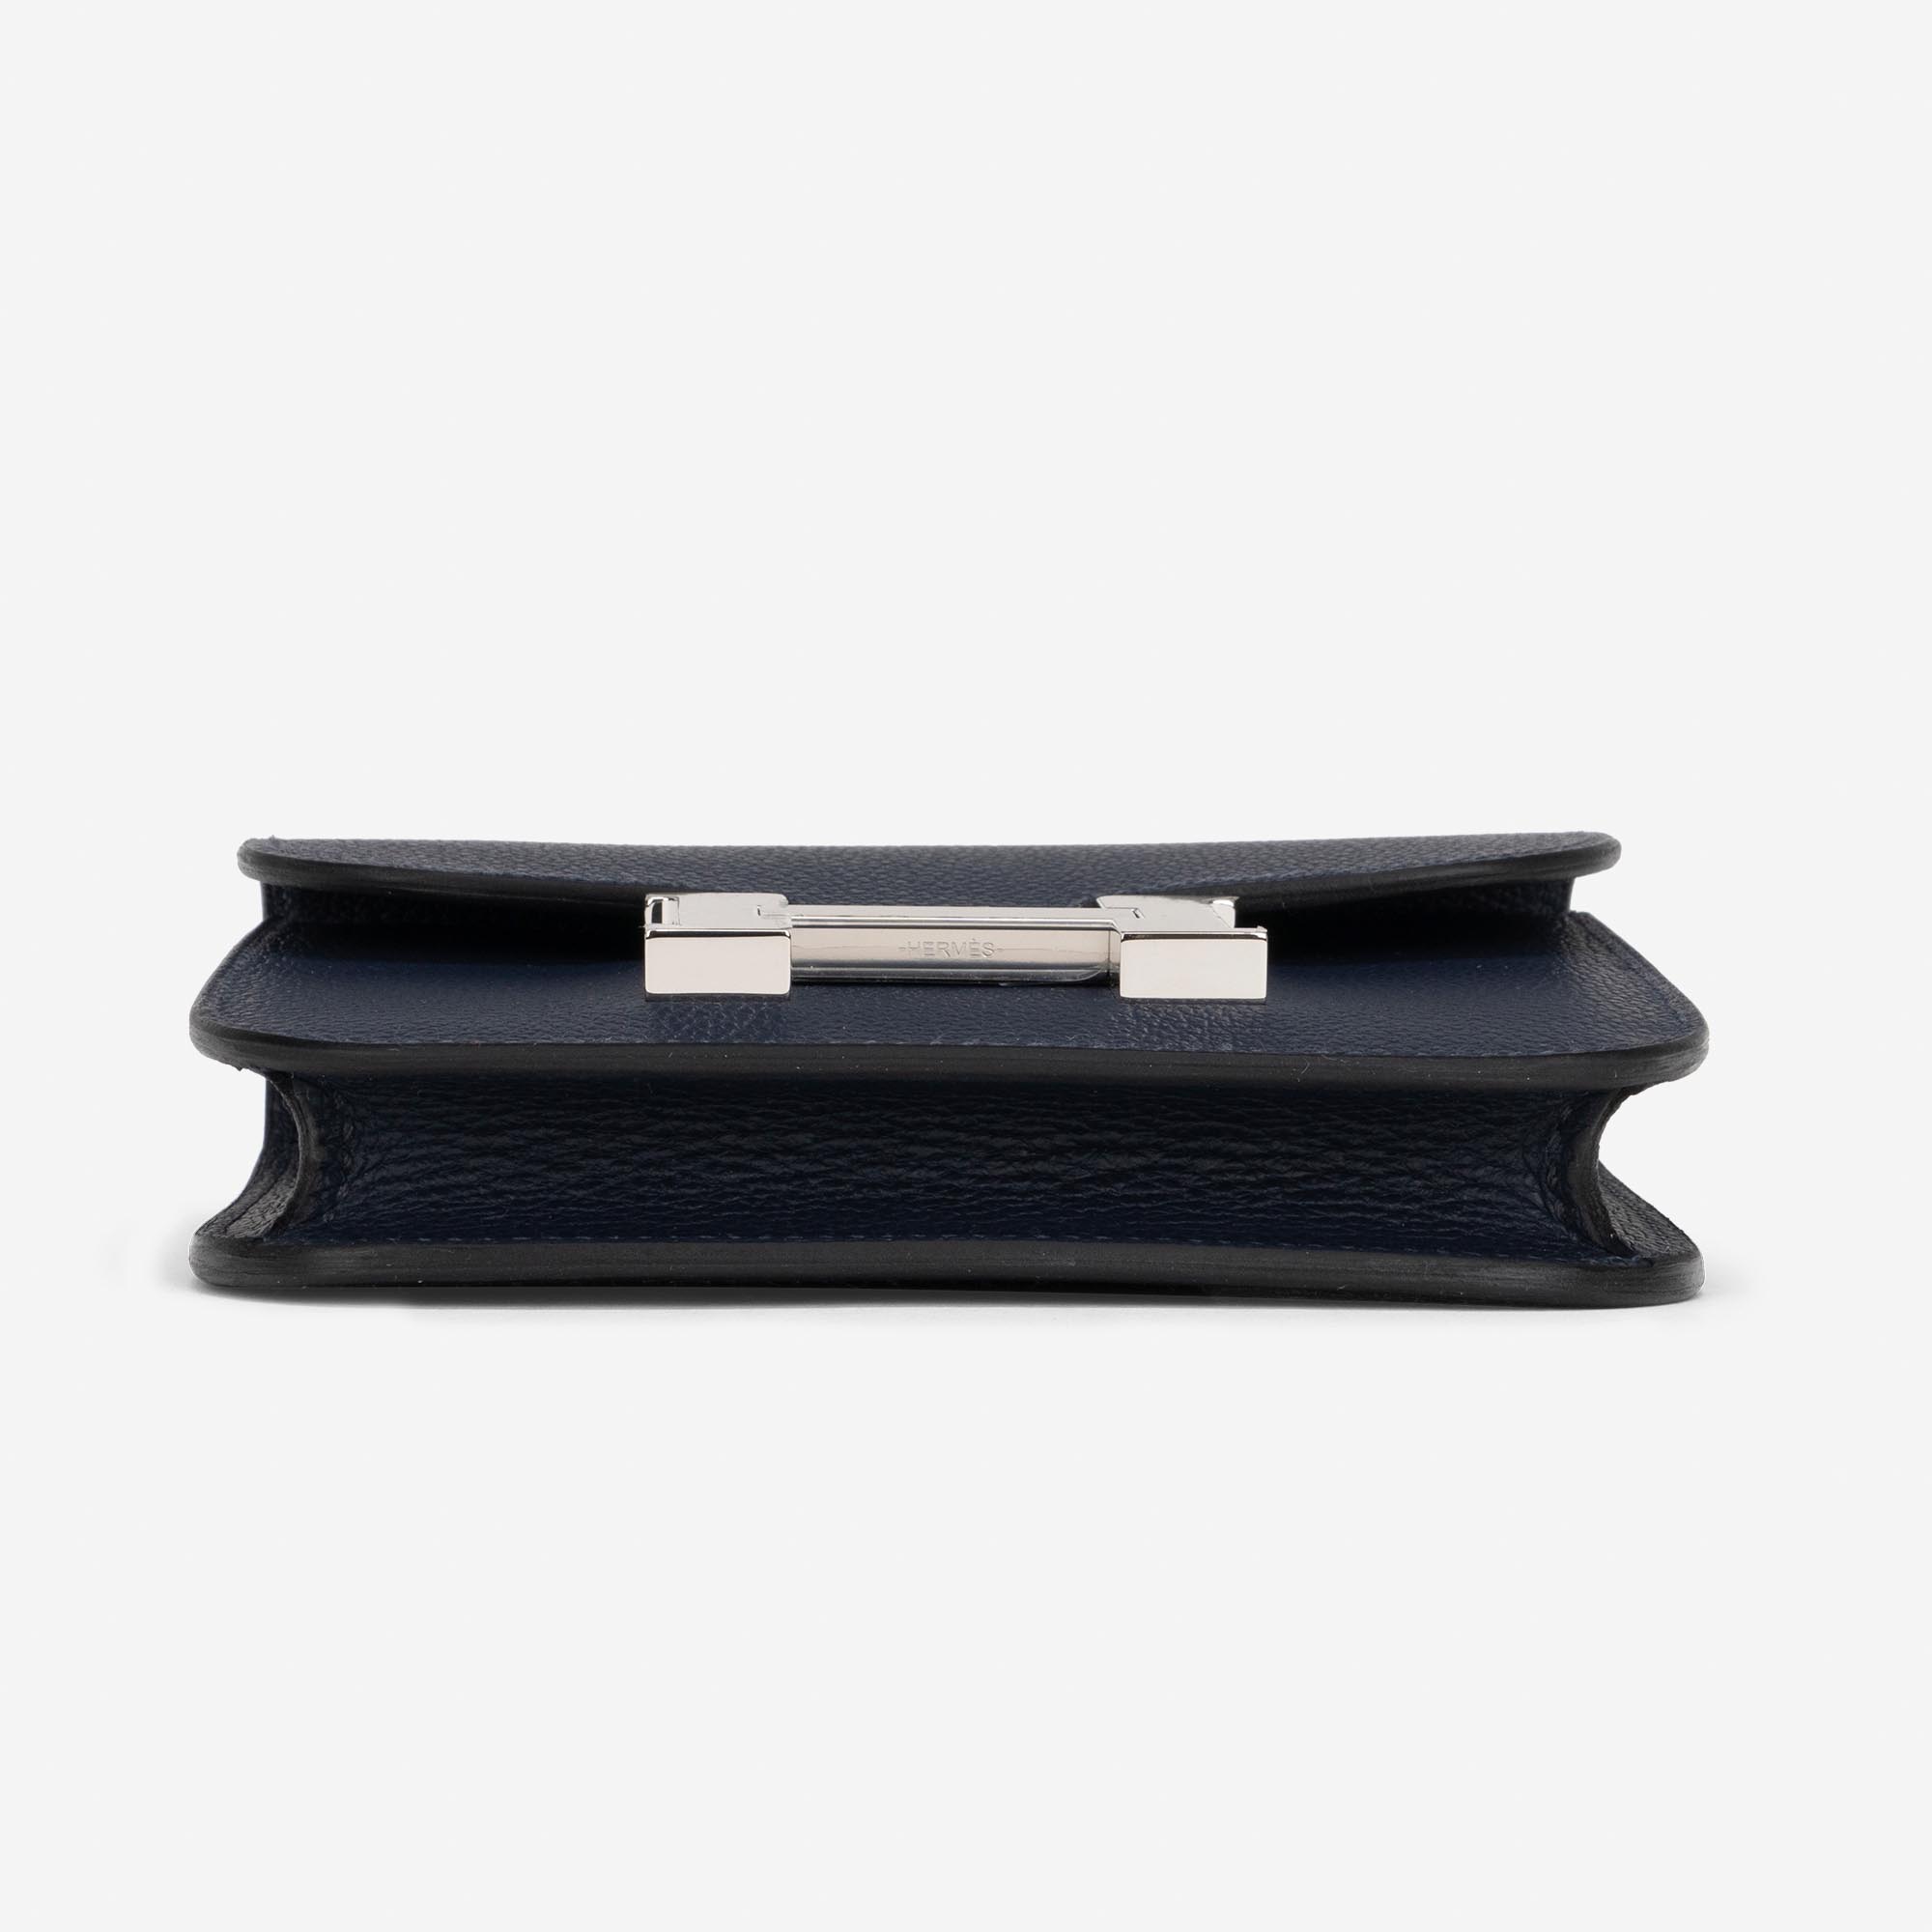 The Constance Waist Pouch/Belt Bag/Wallet, Which is it?